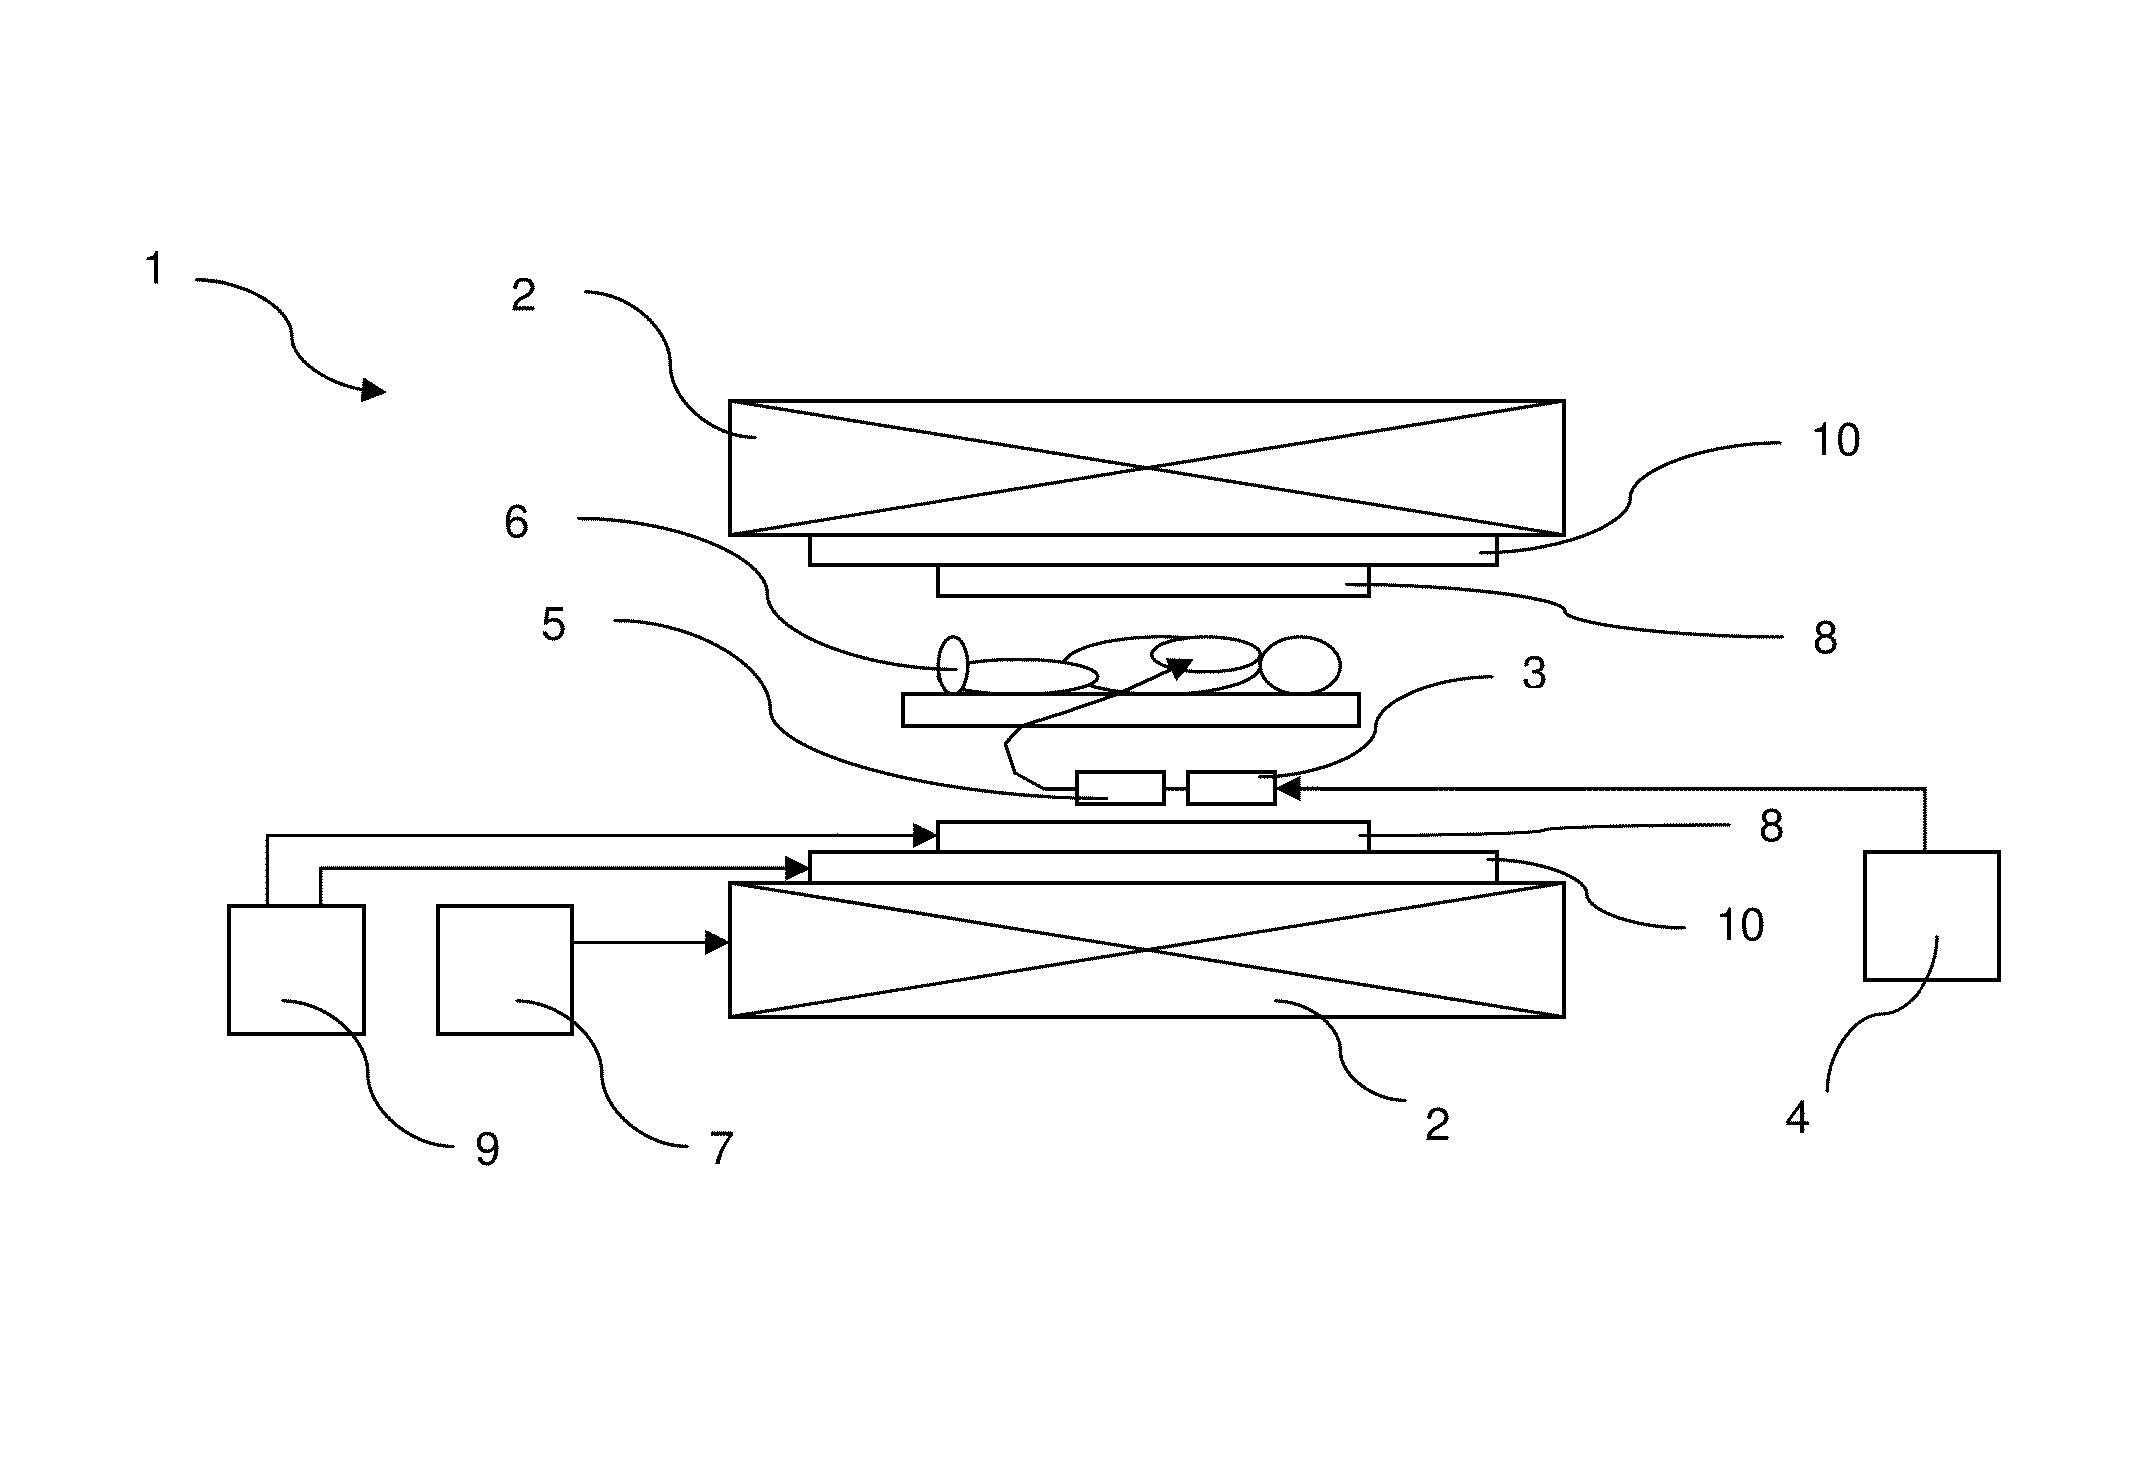 Field cycling method for magnetic resonance